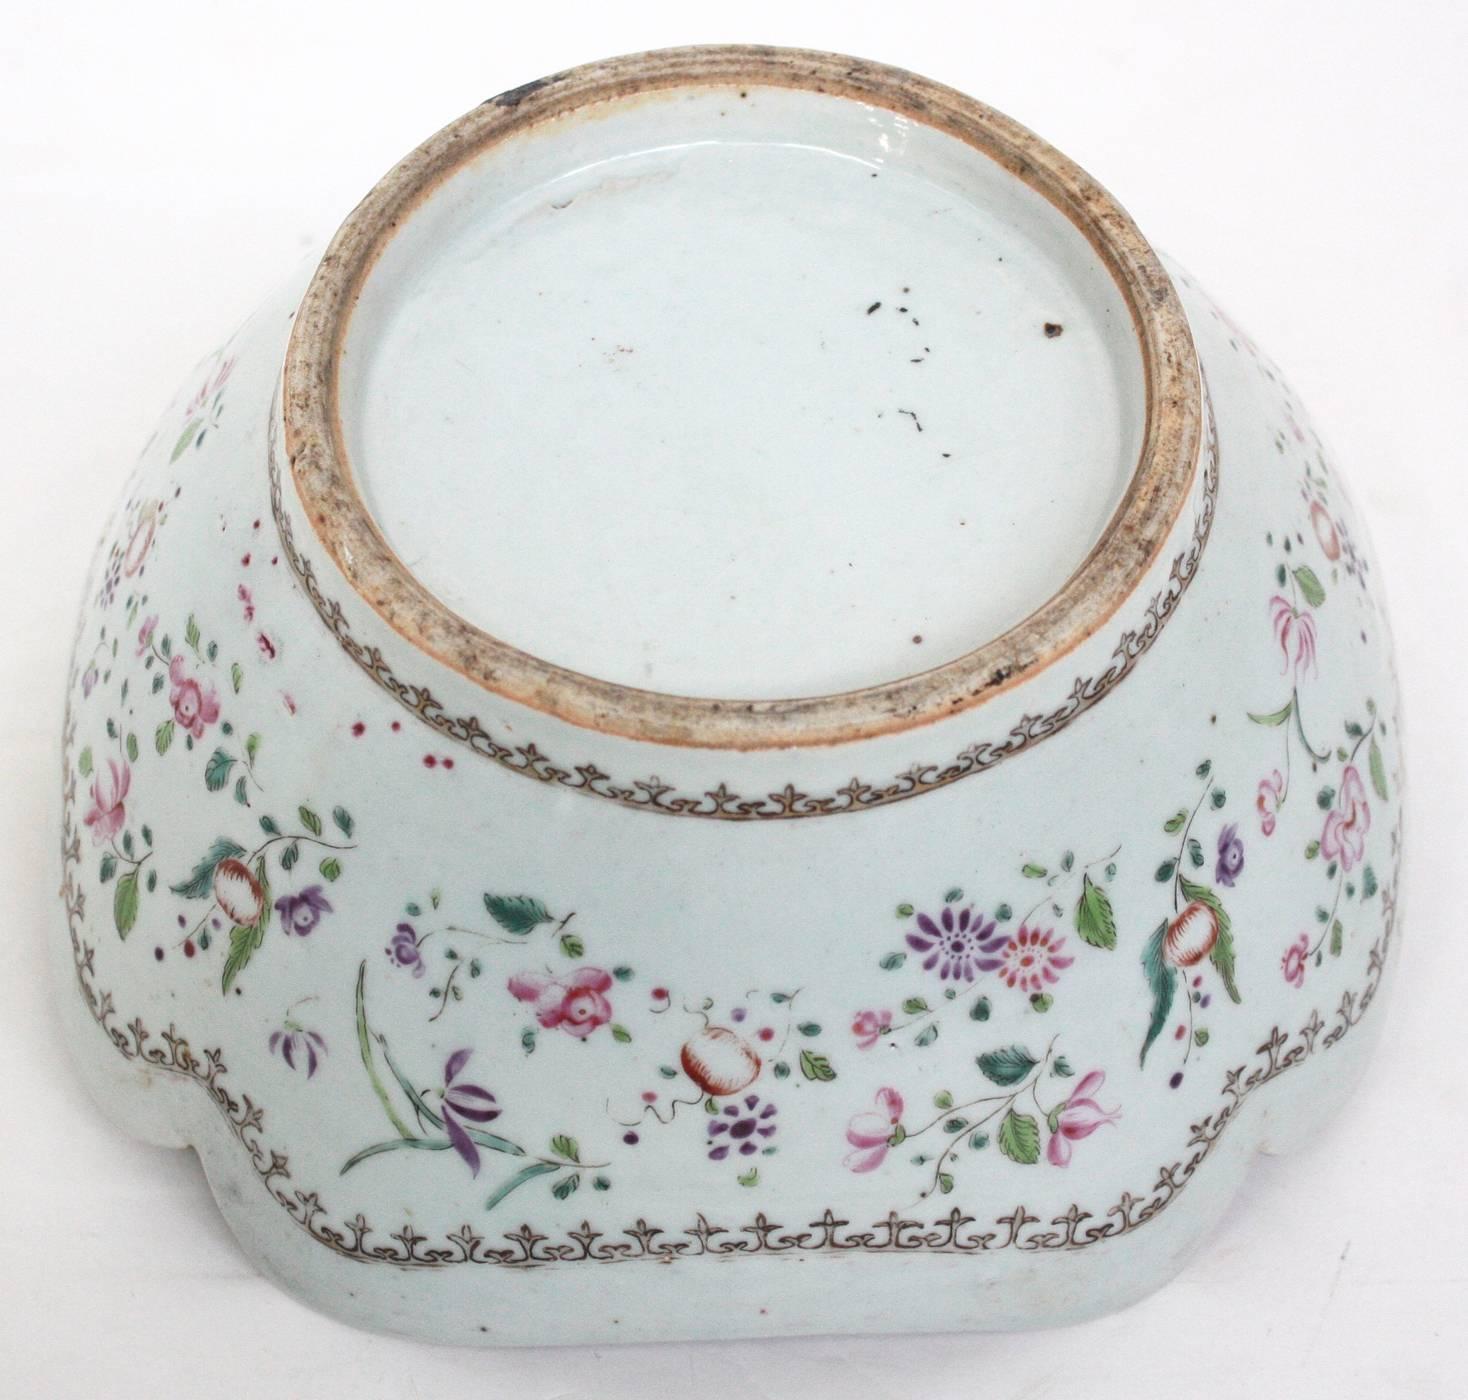 Porcelain Early 19th Century Chinese Export Bowl